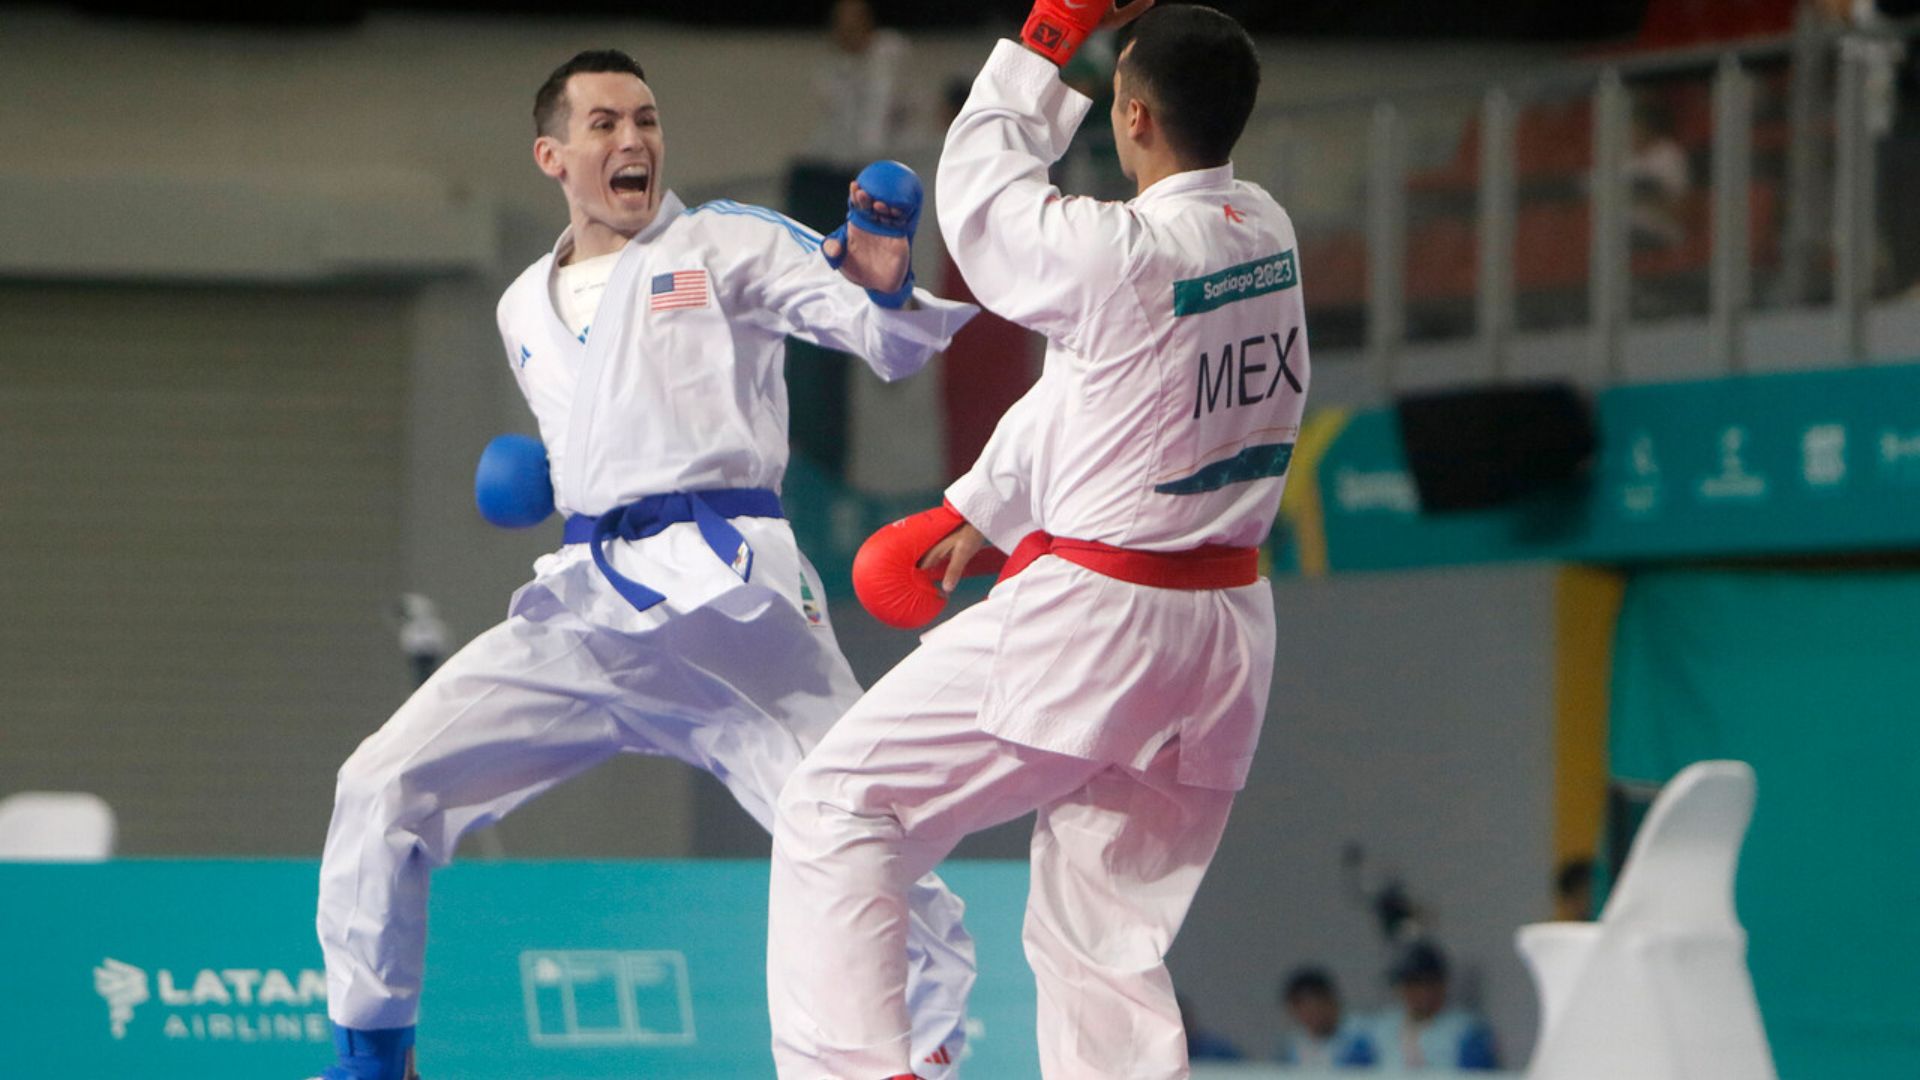 Karate: Thomas Scott Responds to Favoritism and Wins Gold for the United States